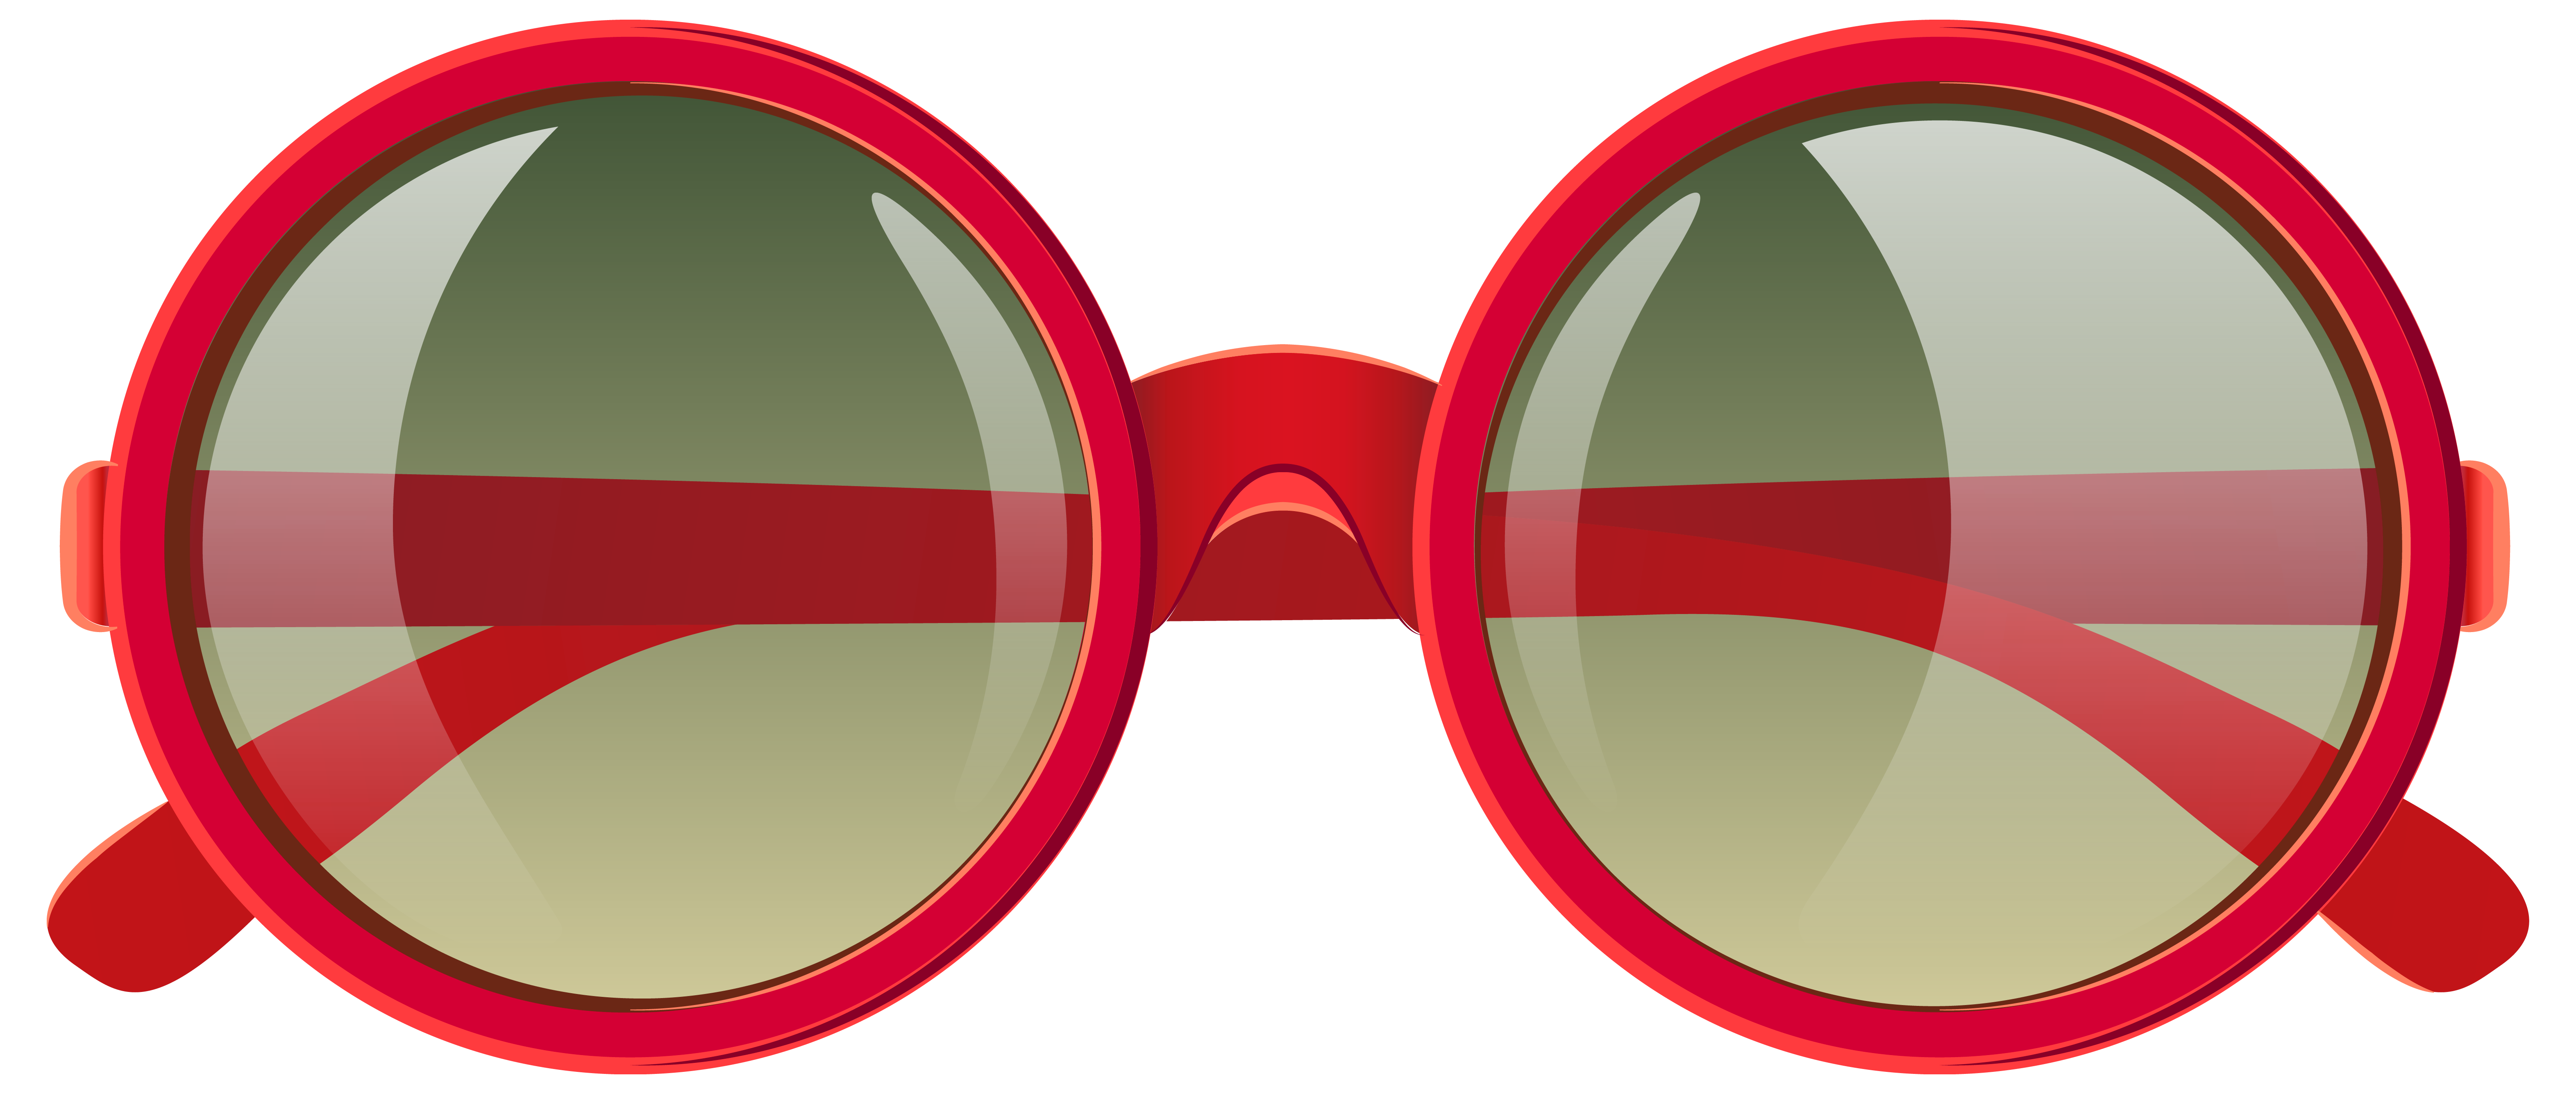 Cute red png image. Flag clipart sunglasses